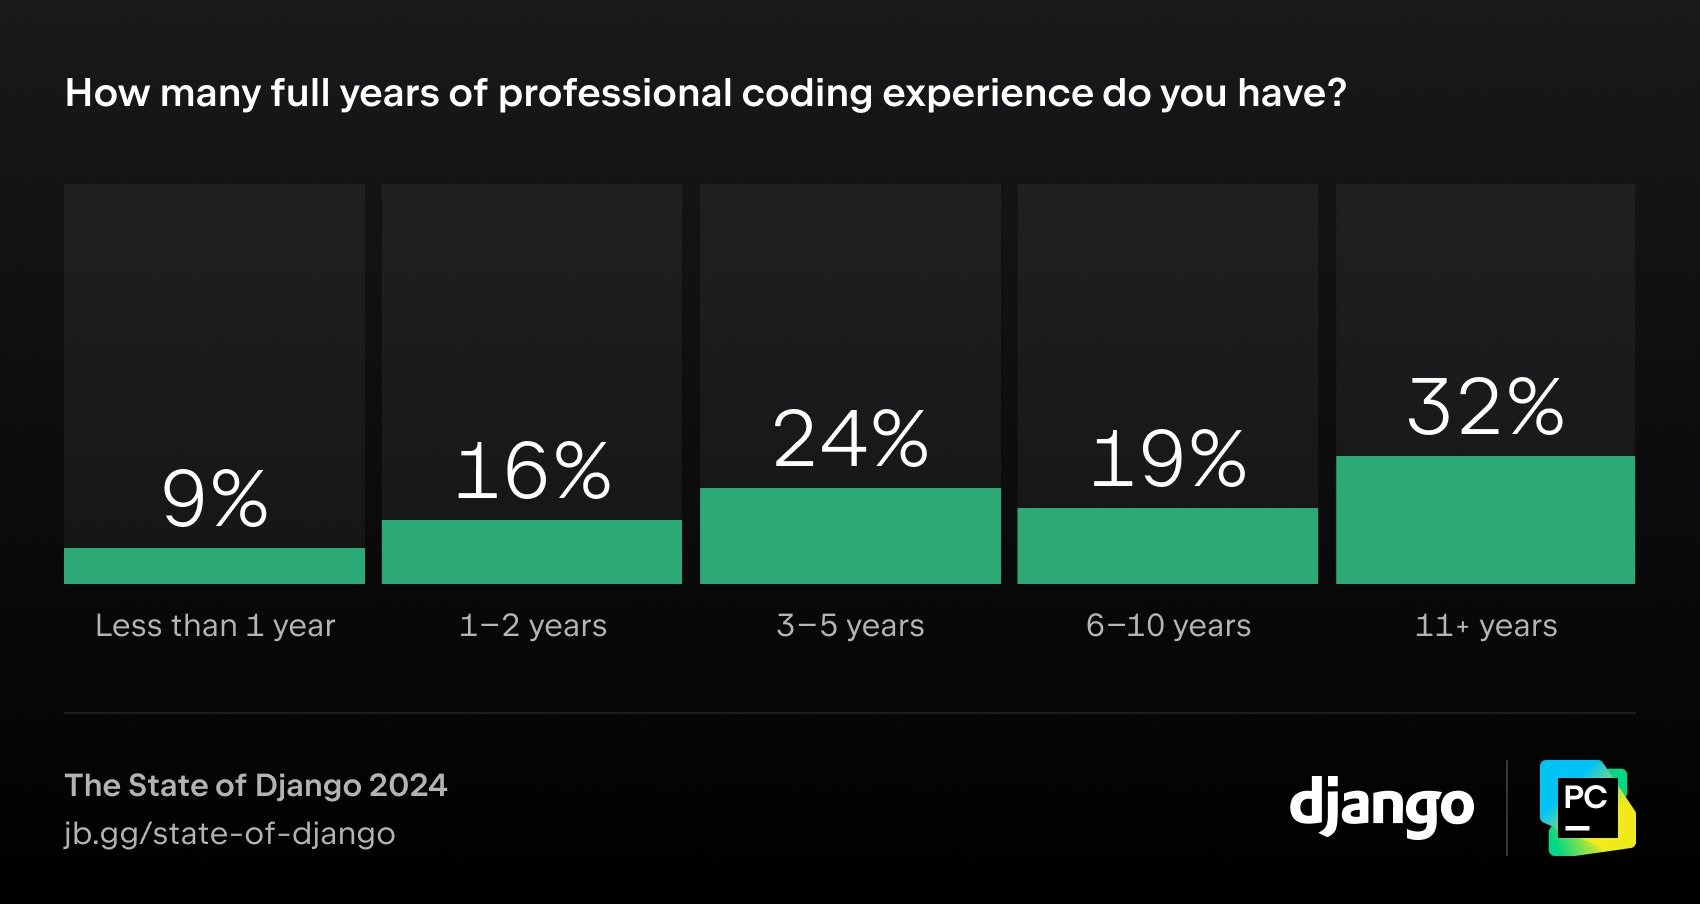 How many full years of professional coding experience do you have?